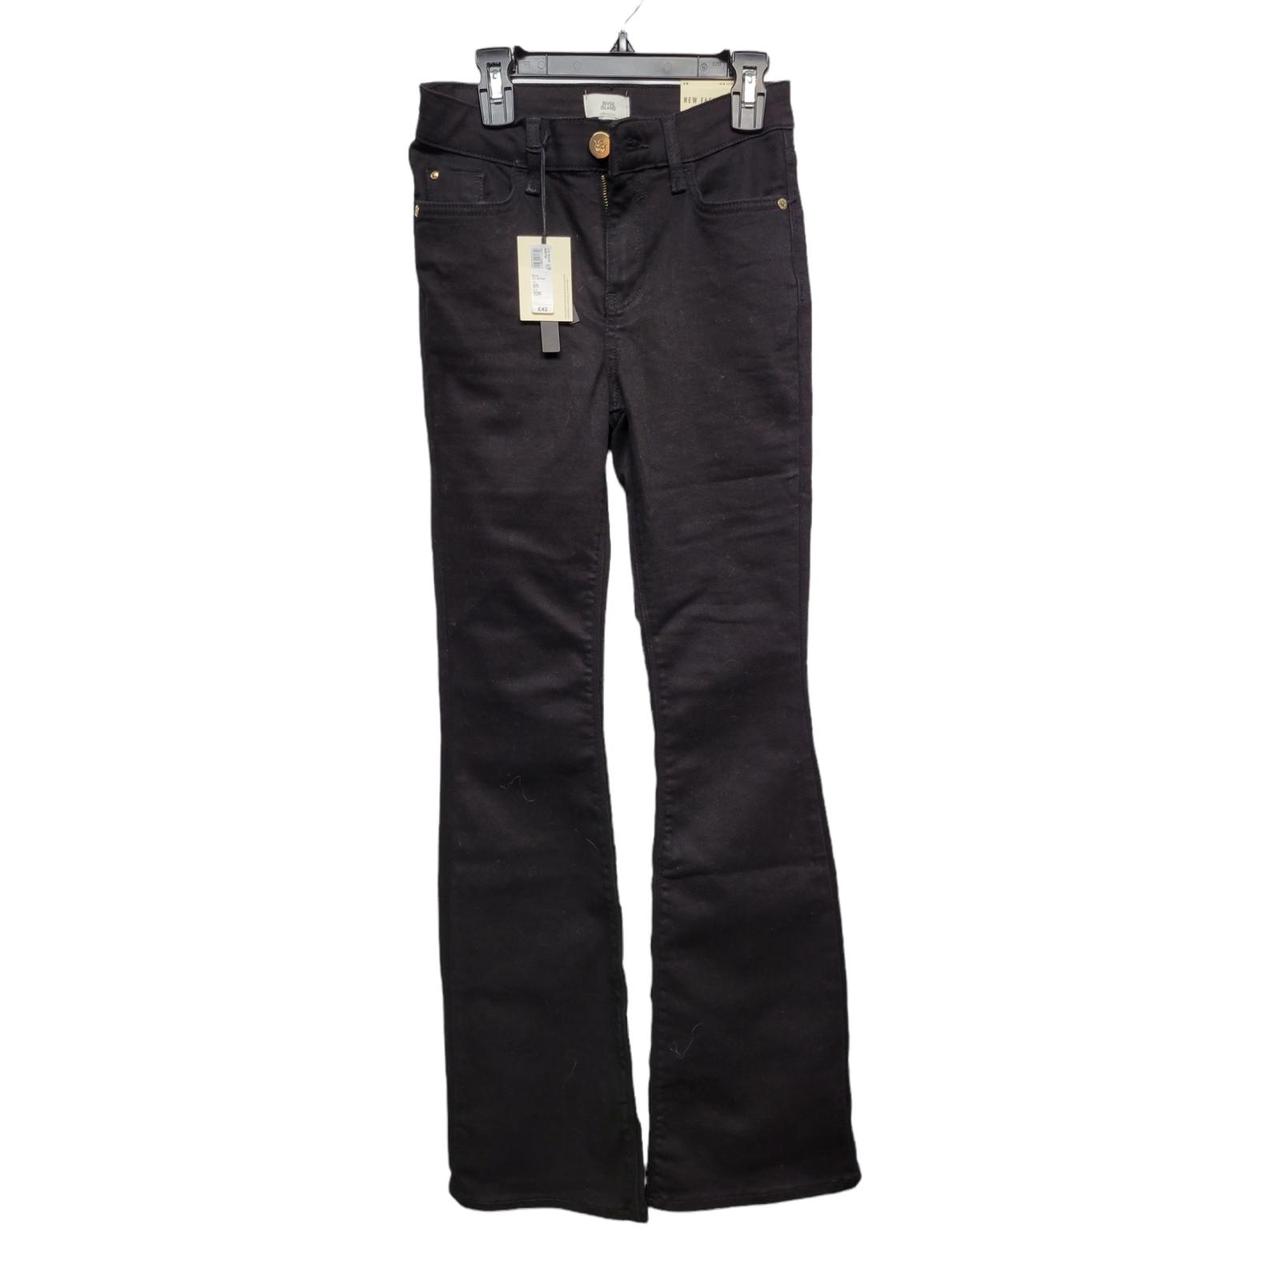 Product Image 1 - BLACK MID RISE FLARED JEANS
River